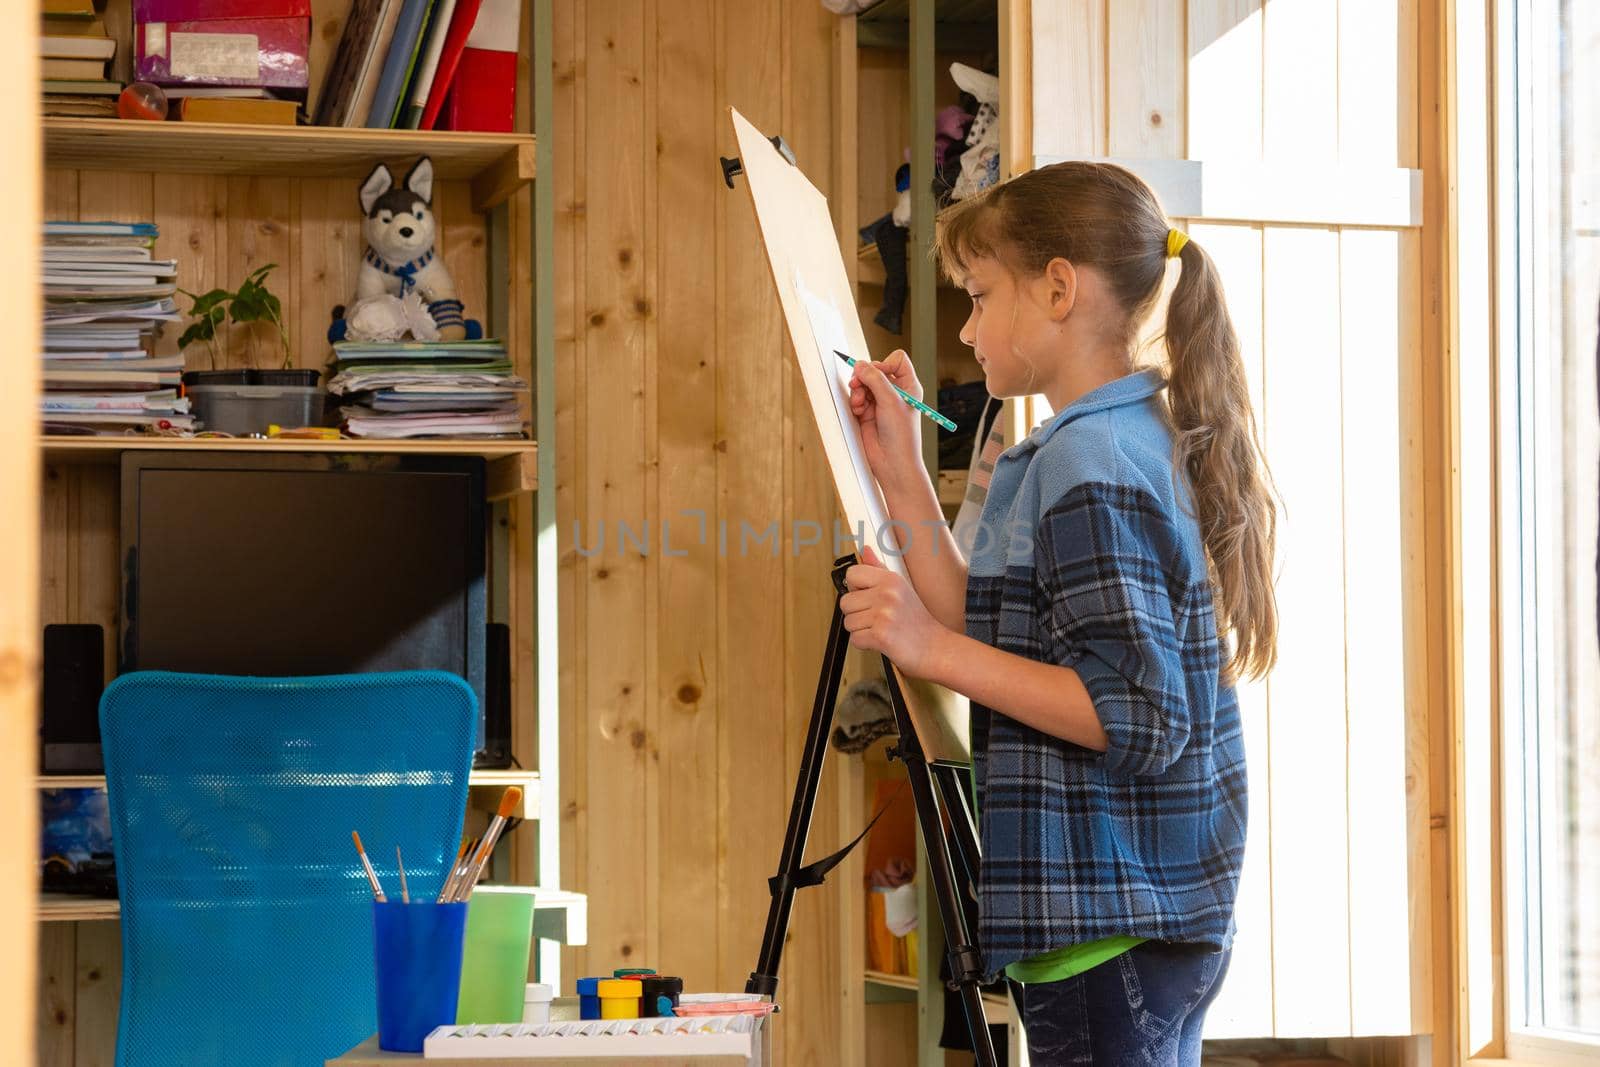 A ten-year-old girl draws on an easel at home by Madhourse